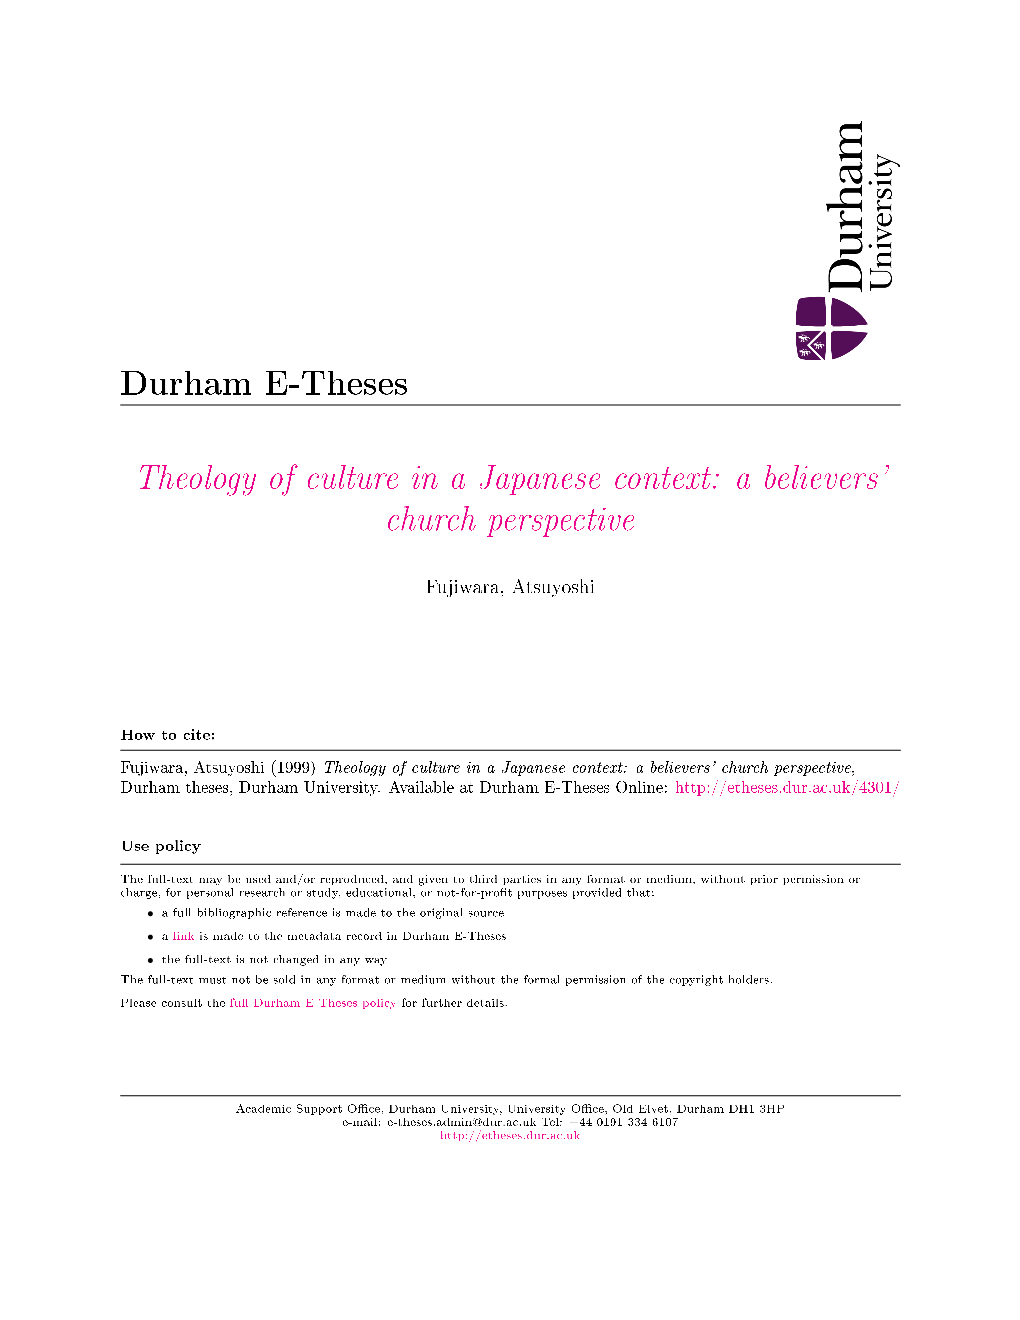 Theology of Culture in a Japanese Context: a Believers' Church Perspective